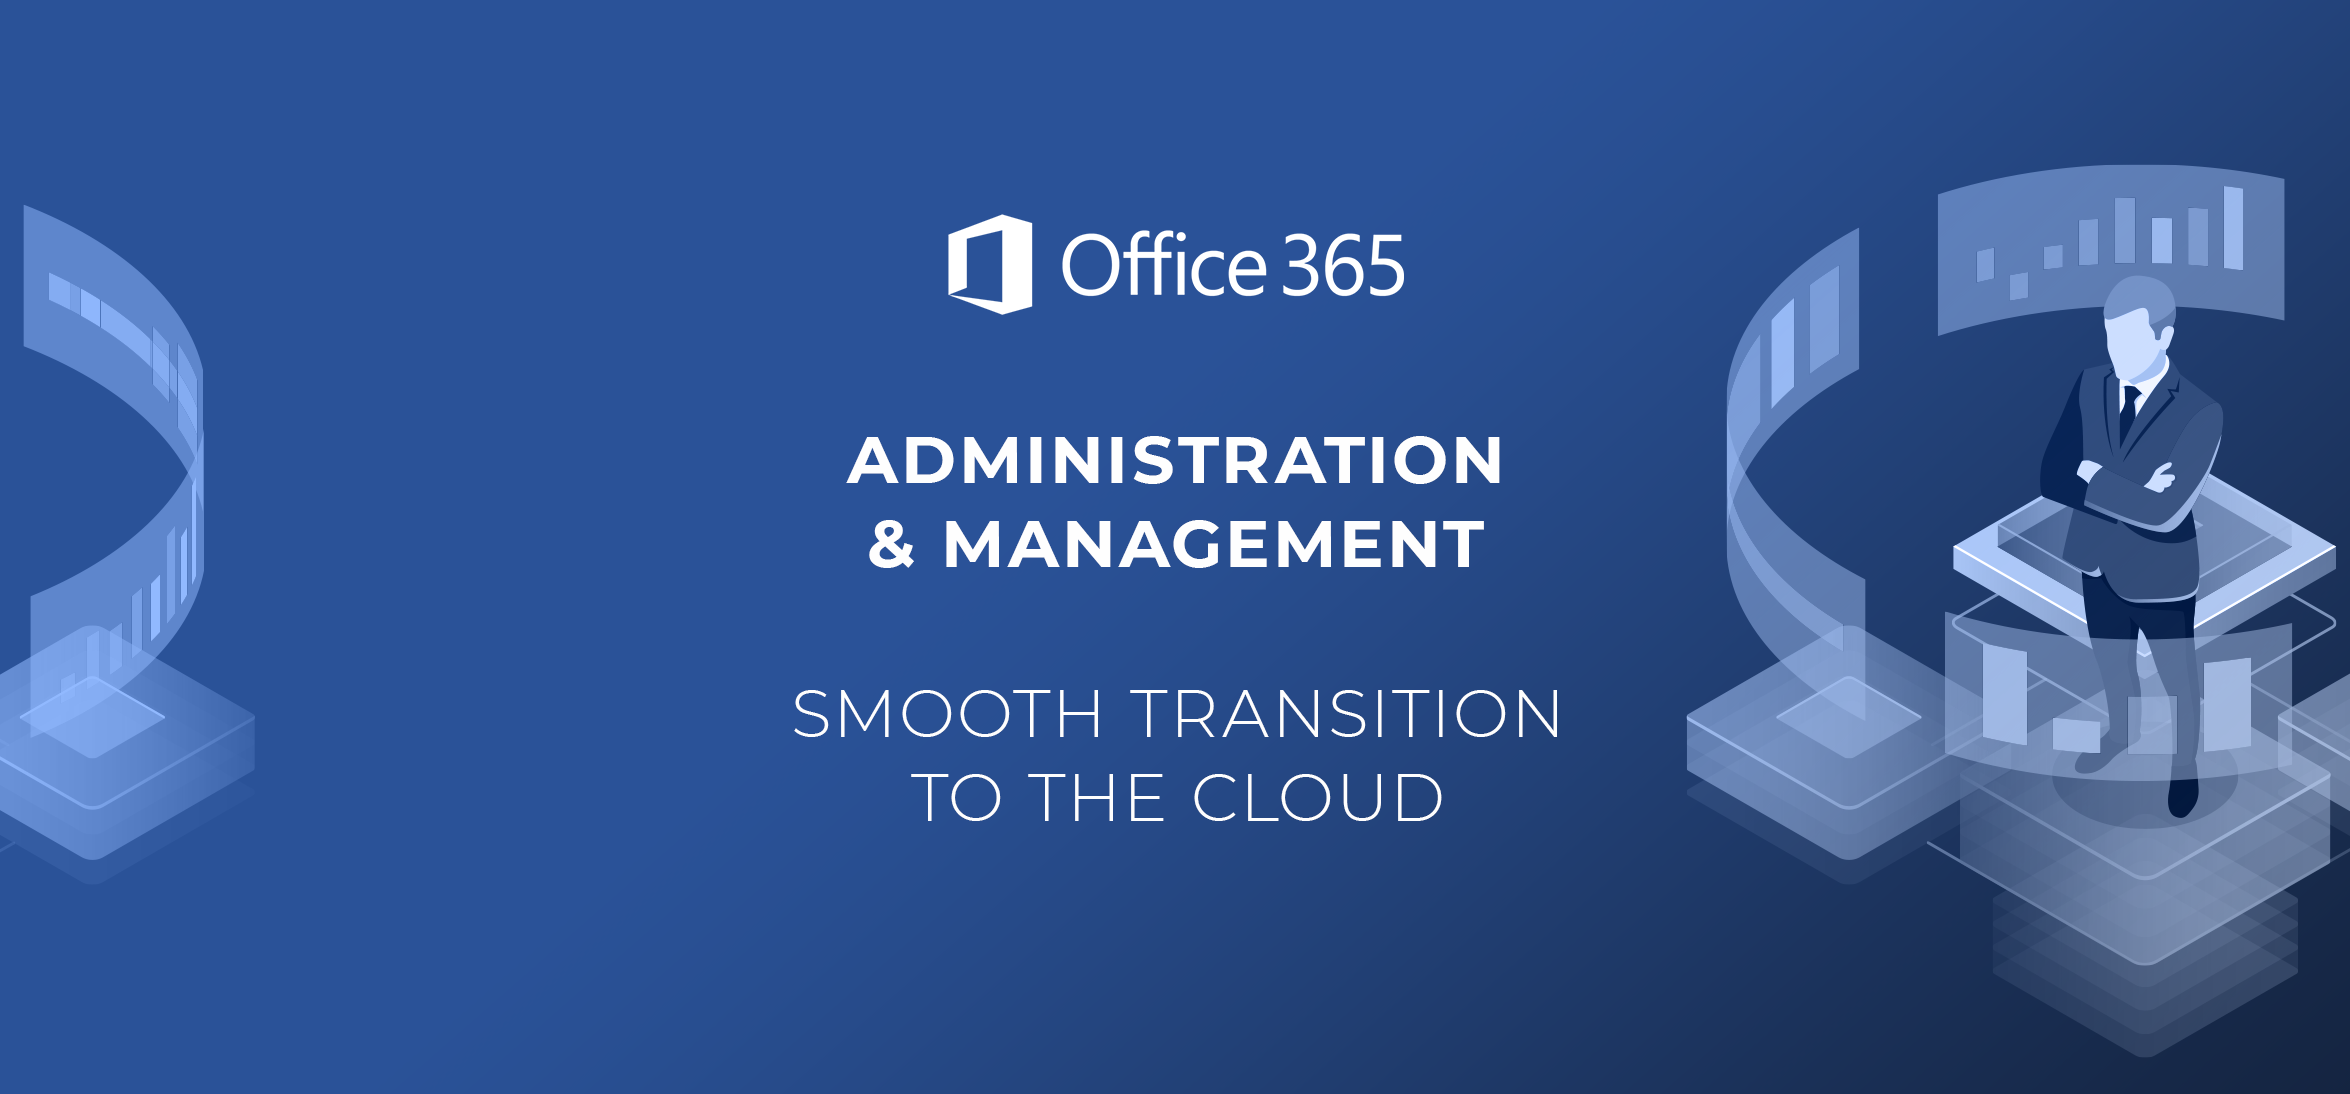 Microsoft Office 365 Administration Services in Borrego Springs CA, 92004